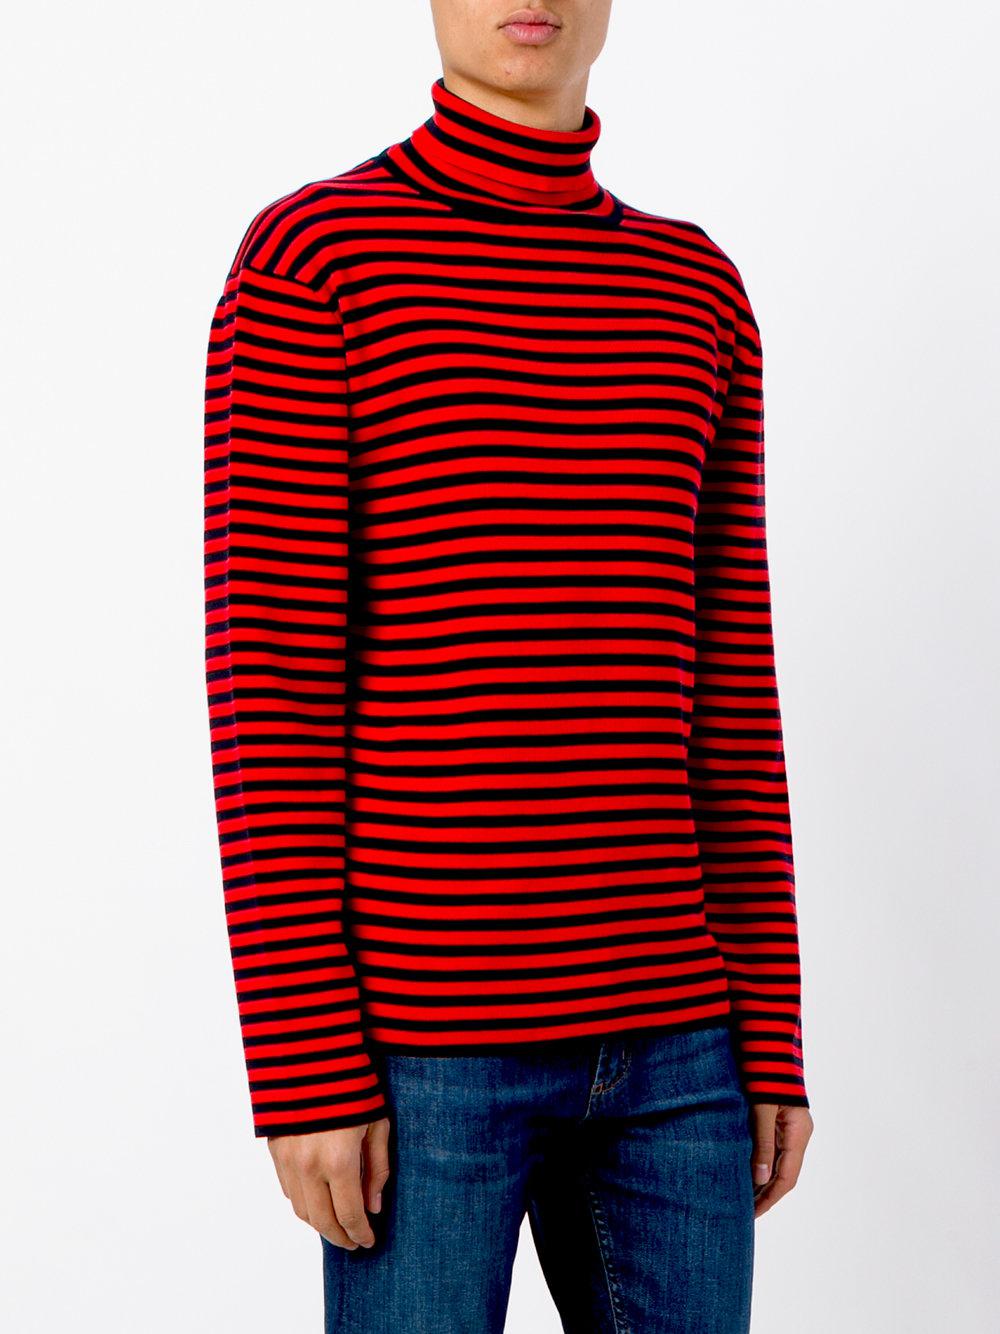 Gucci Cotton Striped Turtleneck Top in Red for Men - Lyst